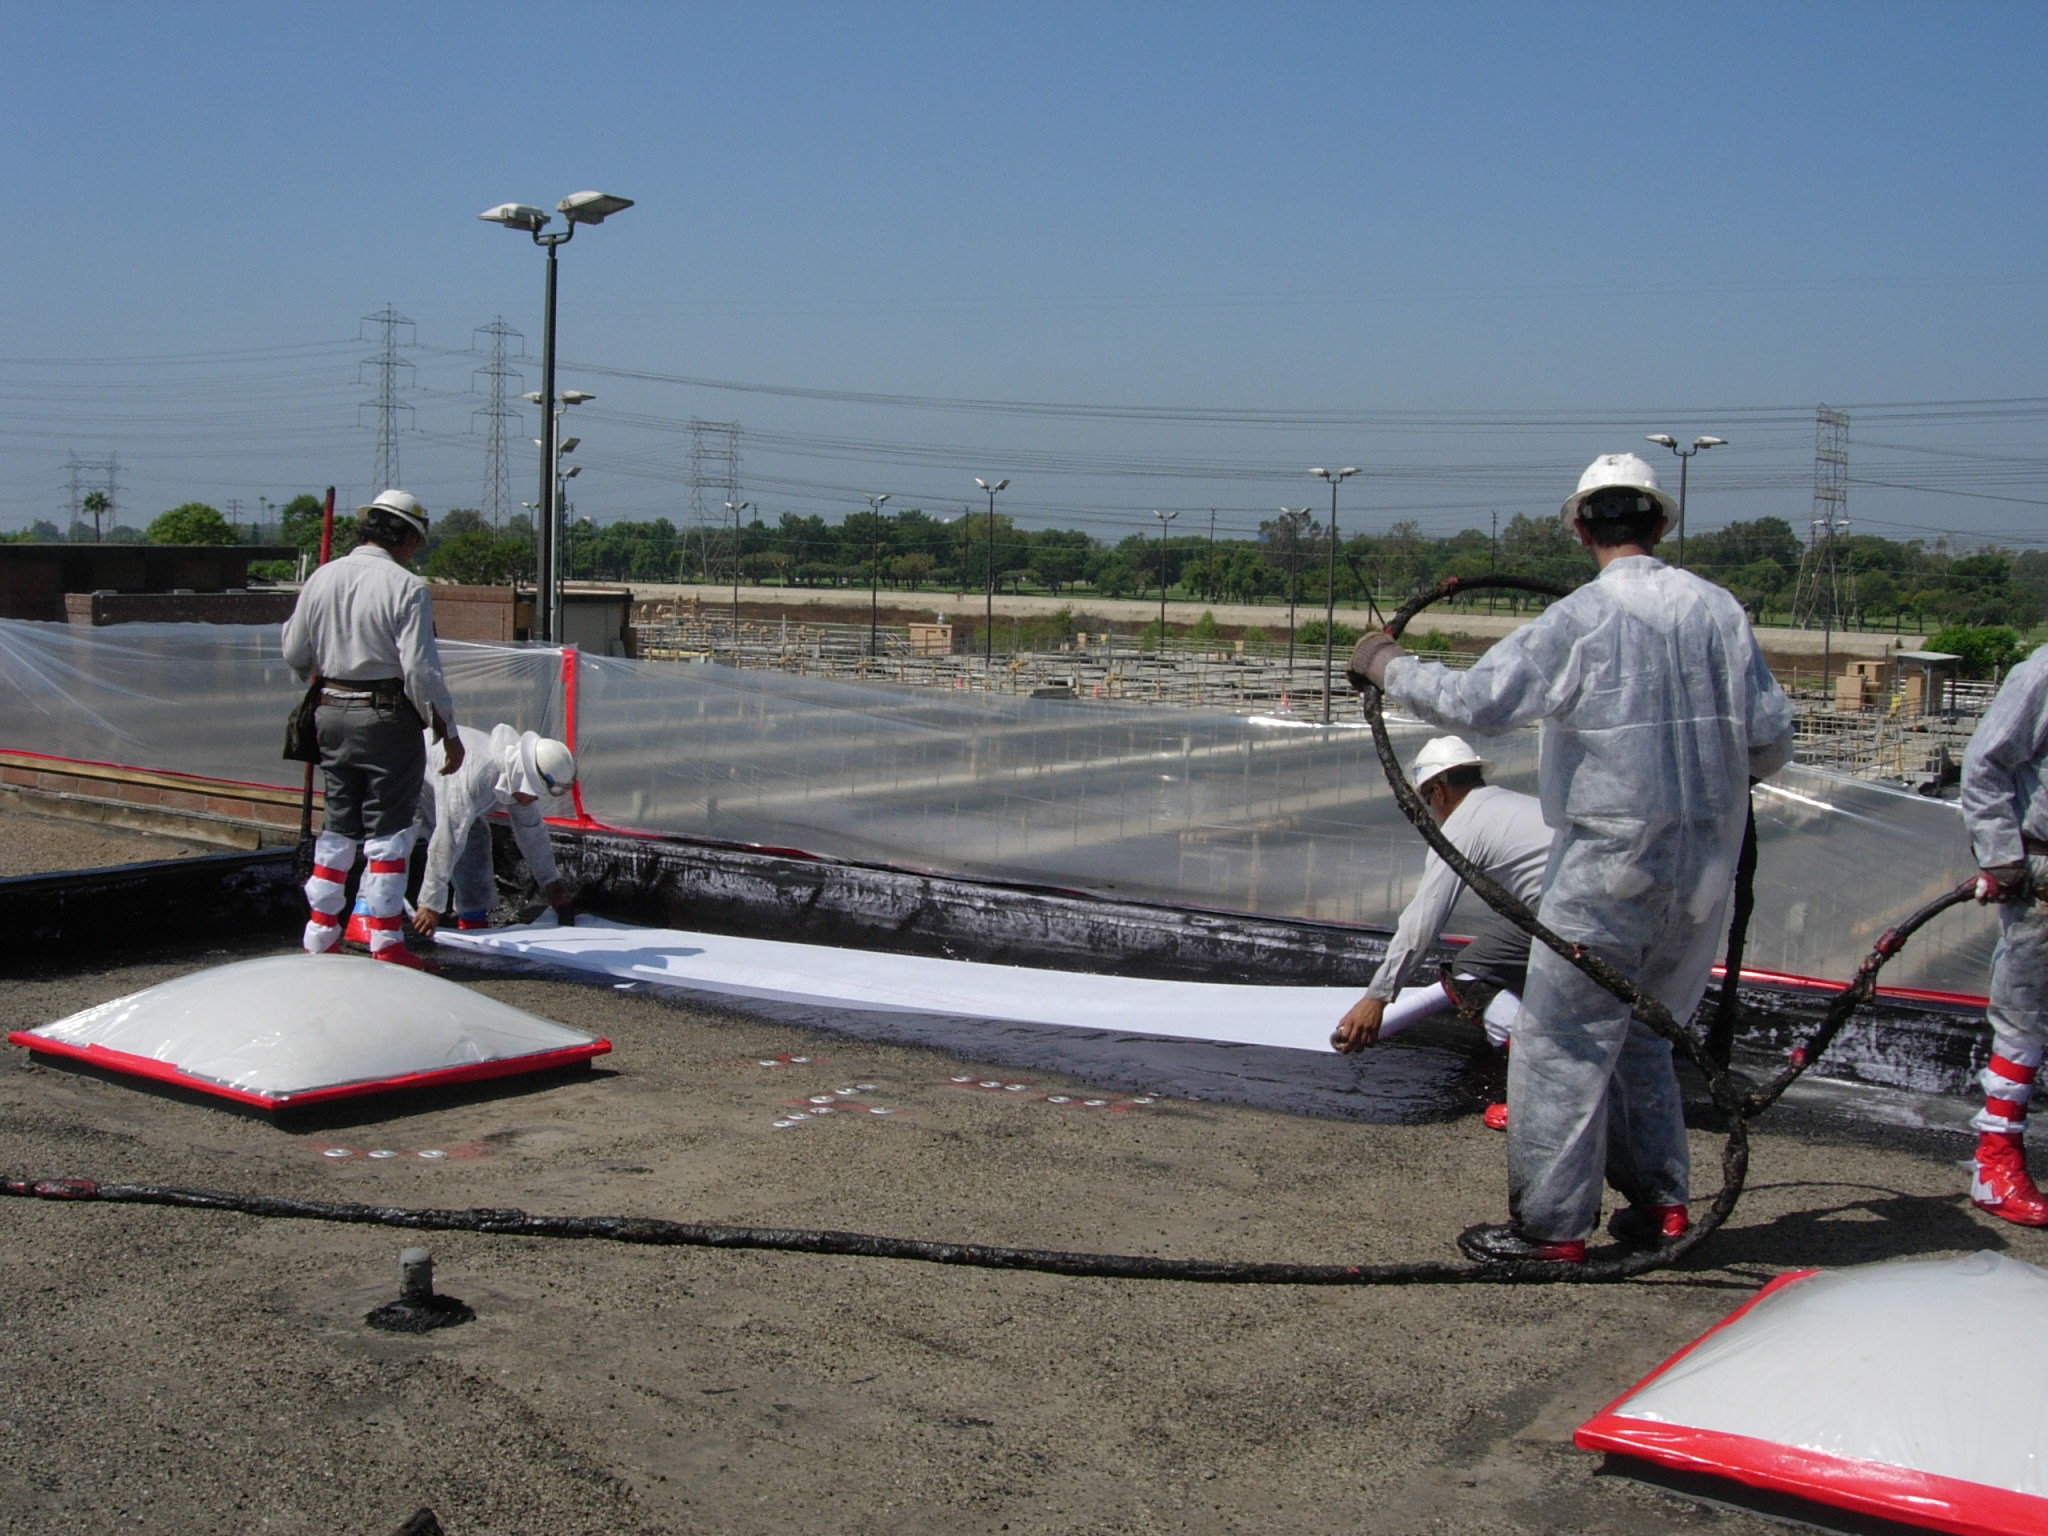 FC and Sons Roofing Protfolio | Commercial and Industrial Roofing in California | Commercial and Industrial Roofing in Nevada | Commercial and Industrial Roofing in Arizona